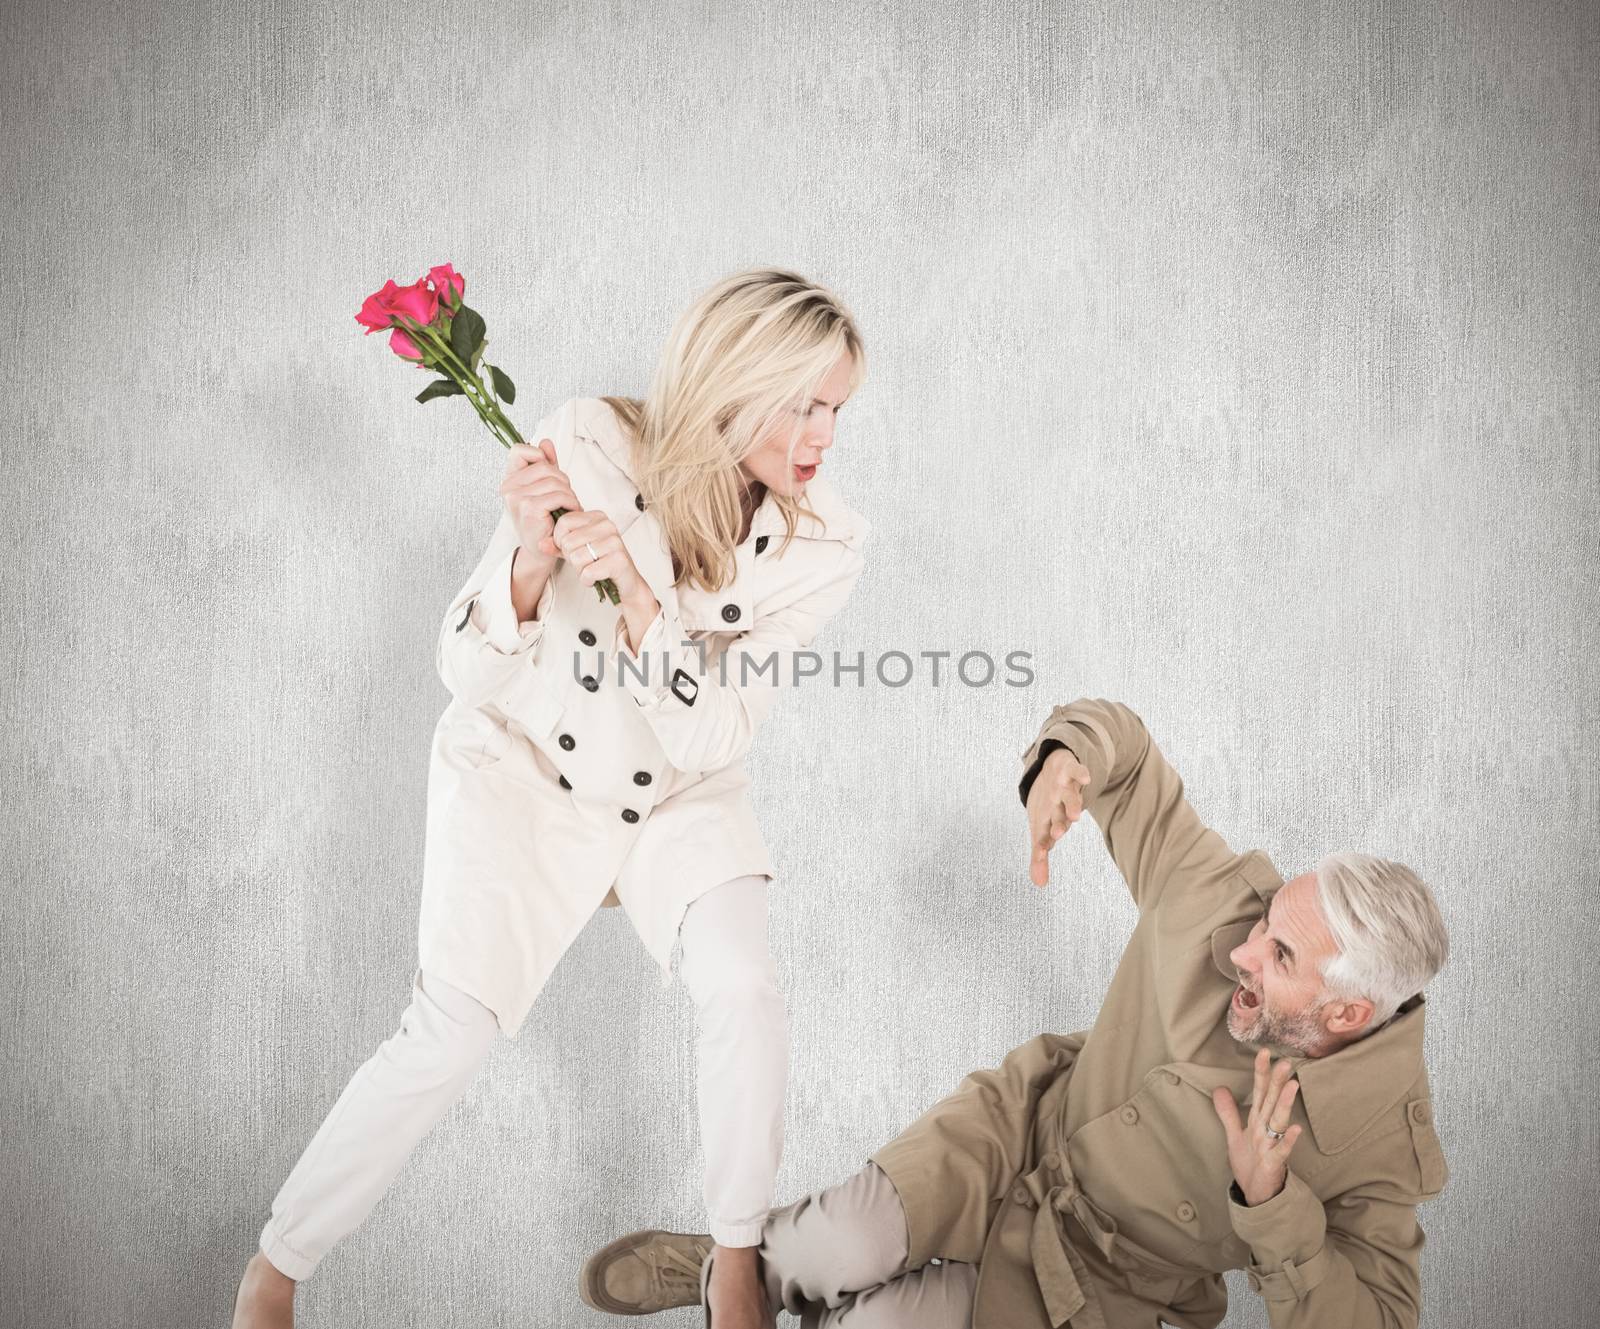 Composite image of angry woman attacking partner with rose bouquet by Wavebreakmedia